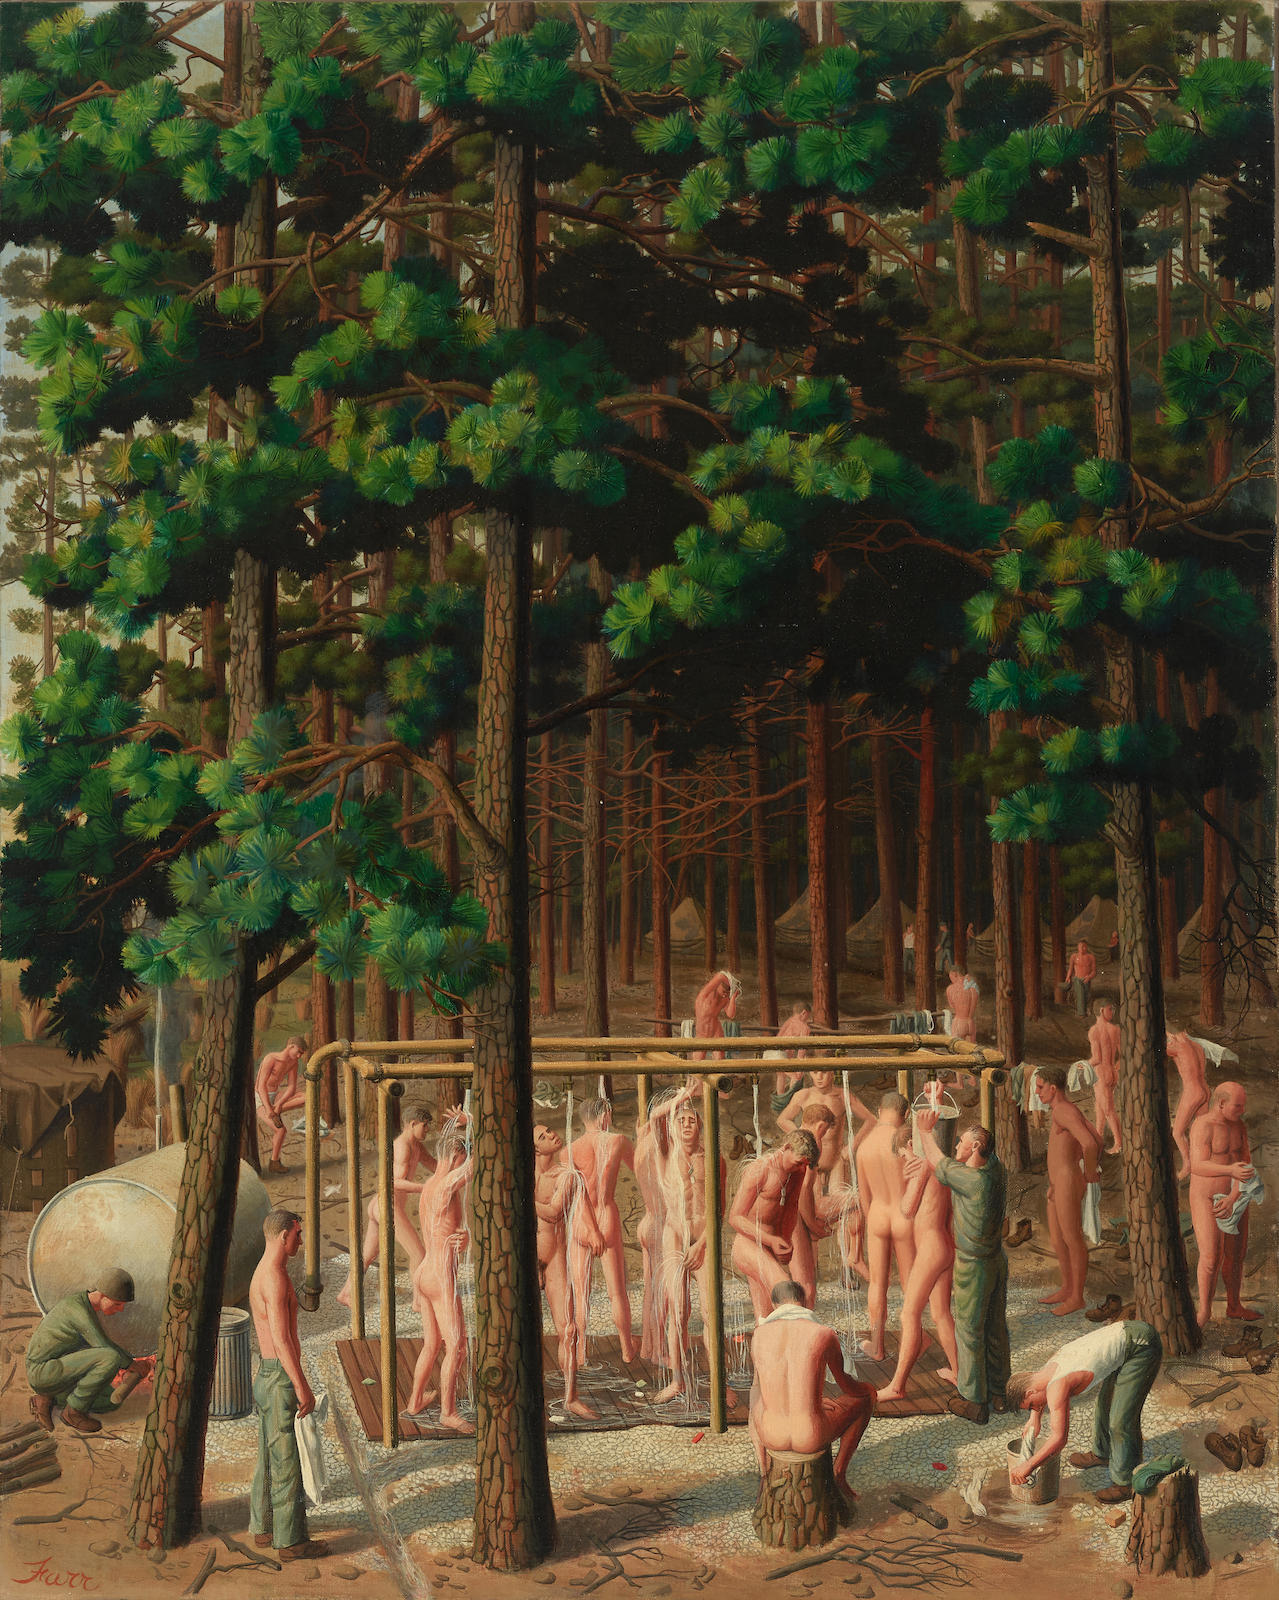 hal-blog: Charles Griffin Farr (1908 - 1997) American.Bathers in a Pine Forest, 1946.